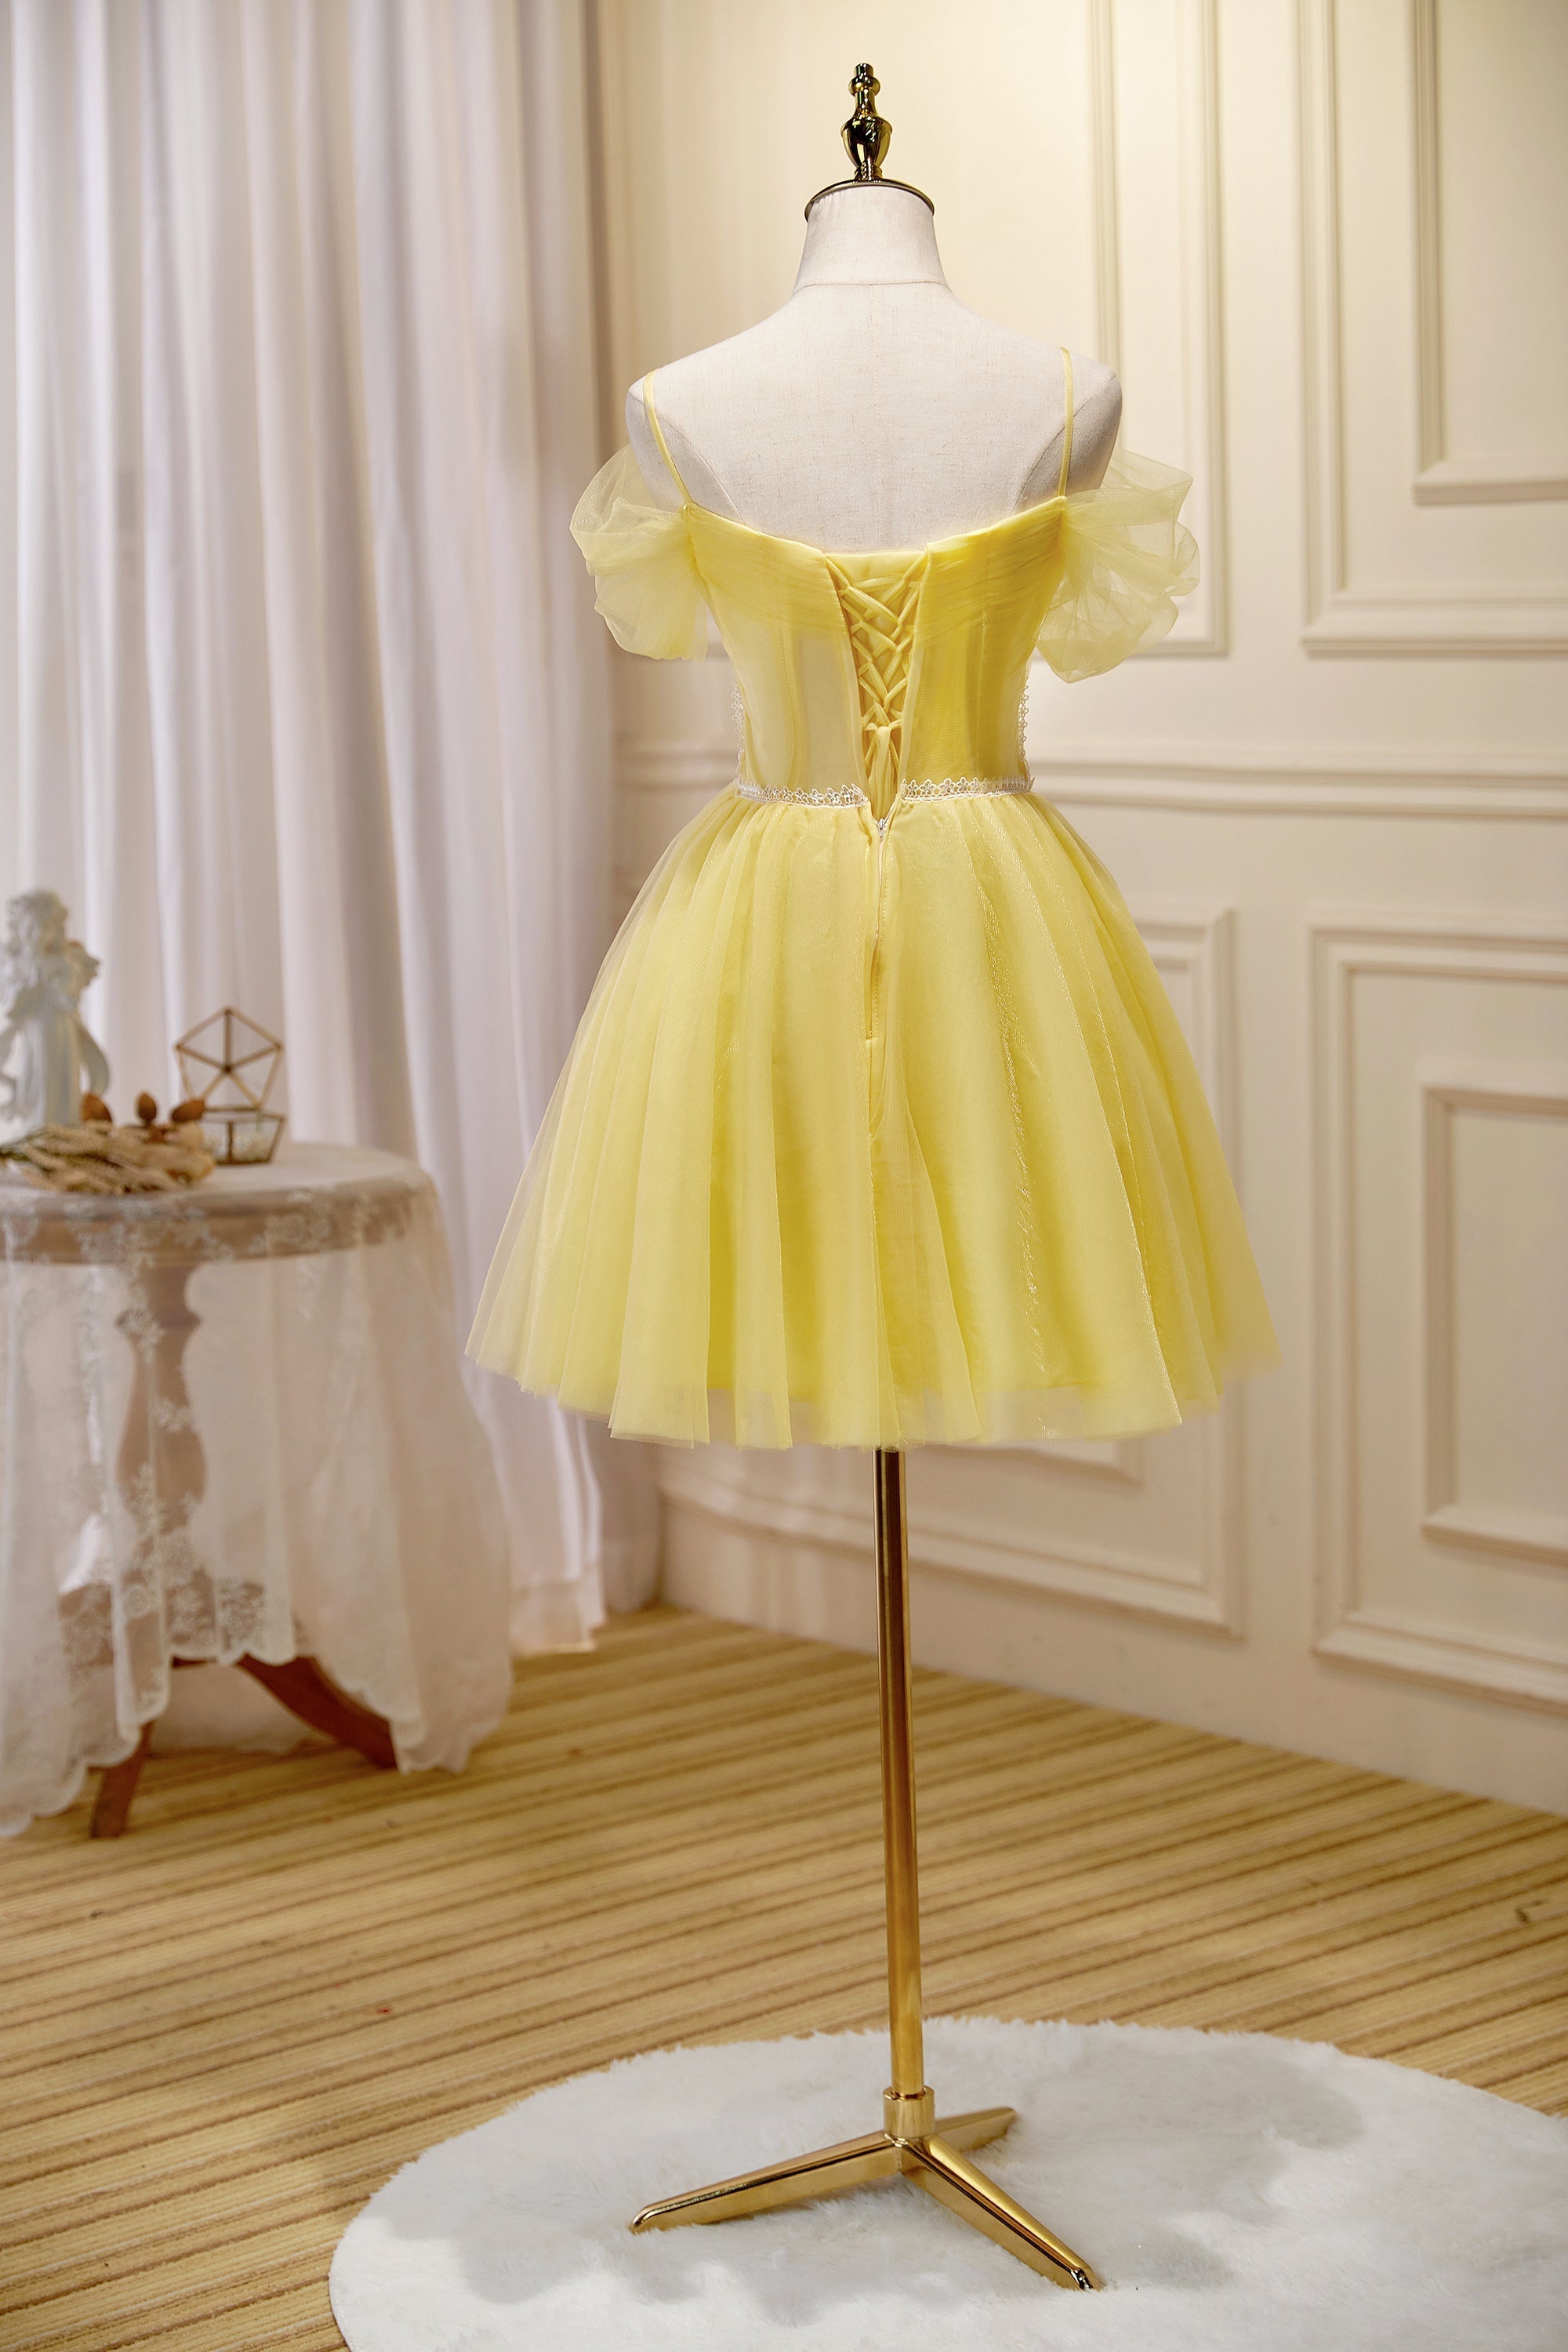 Prom Dresses Tight Fitting, Cute Yellow Spaghetti Straps Off The Shoulder Tulle Short Homecoming Dresses